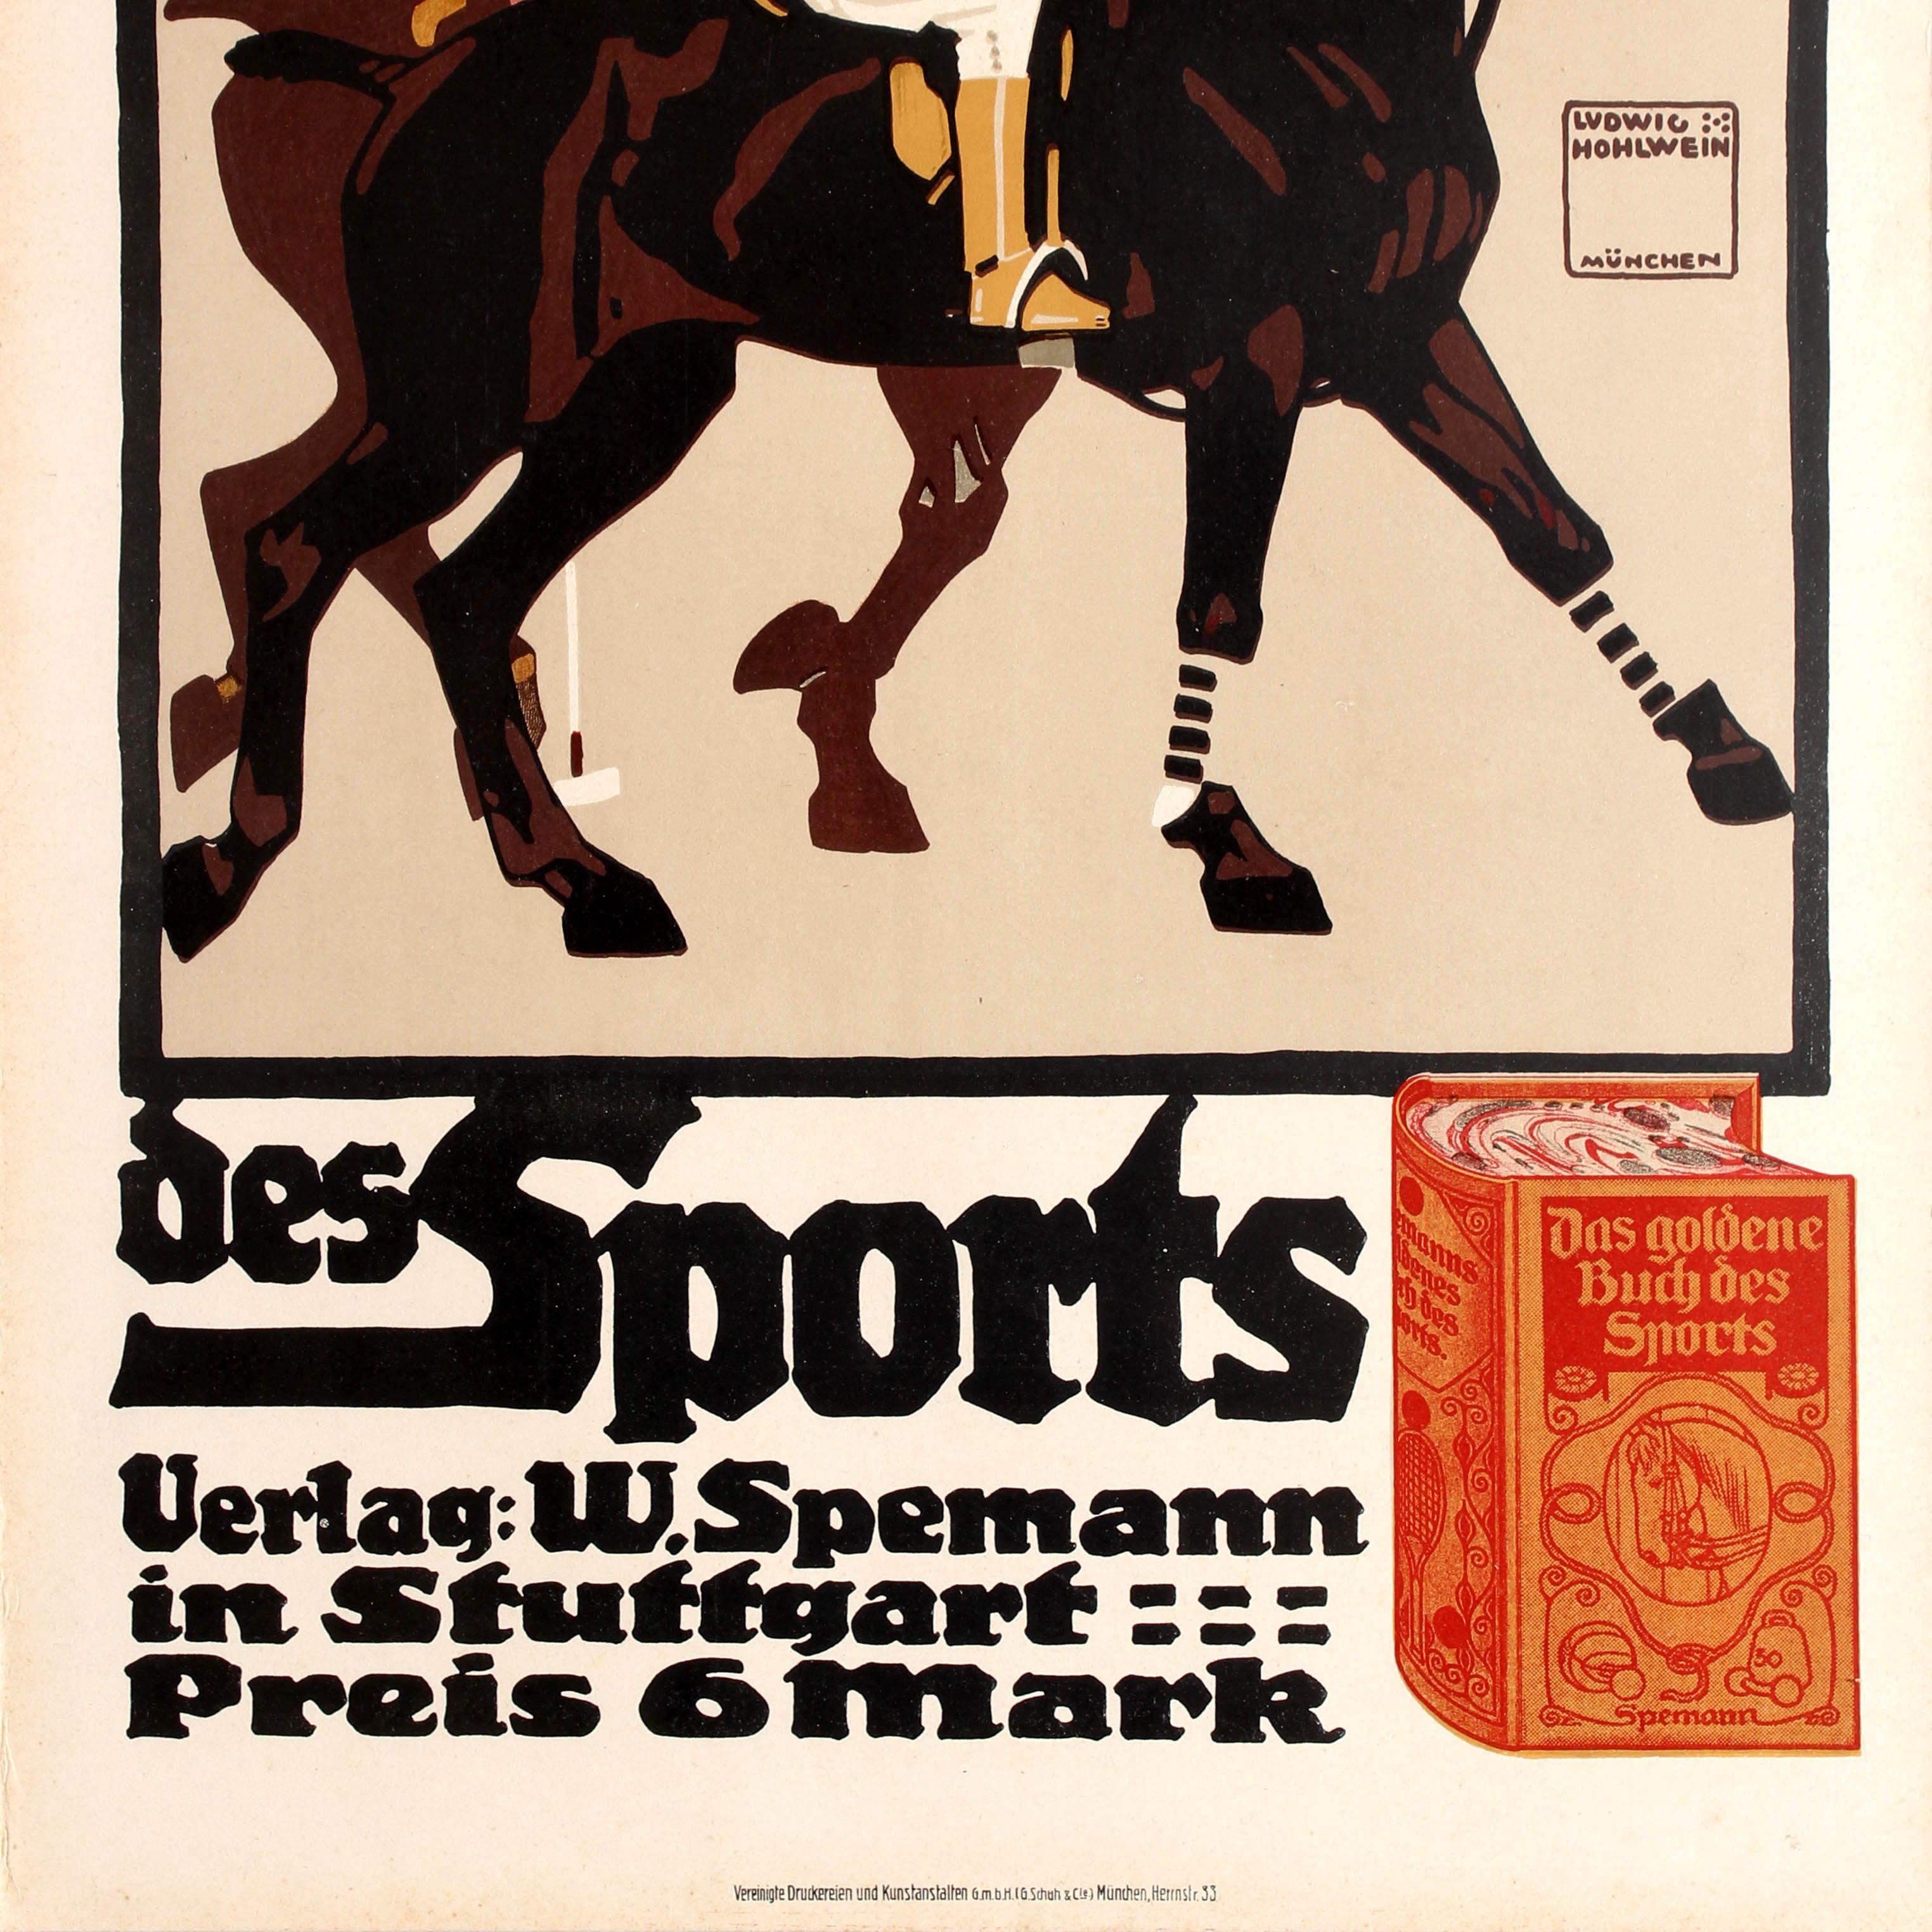 German Original Antique Poster by Hohlwein for the Golden Book of Sports Featuring Polo For Sale